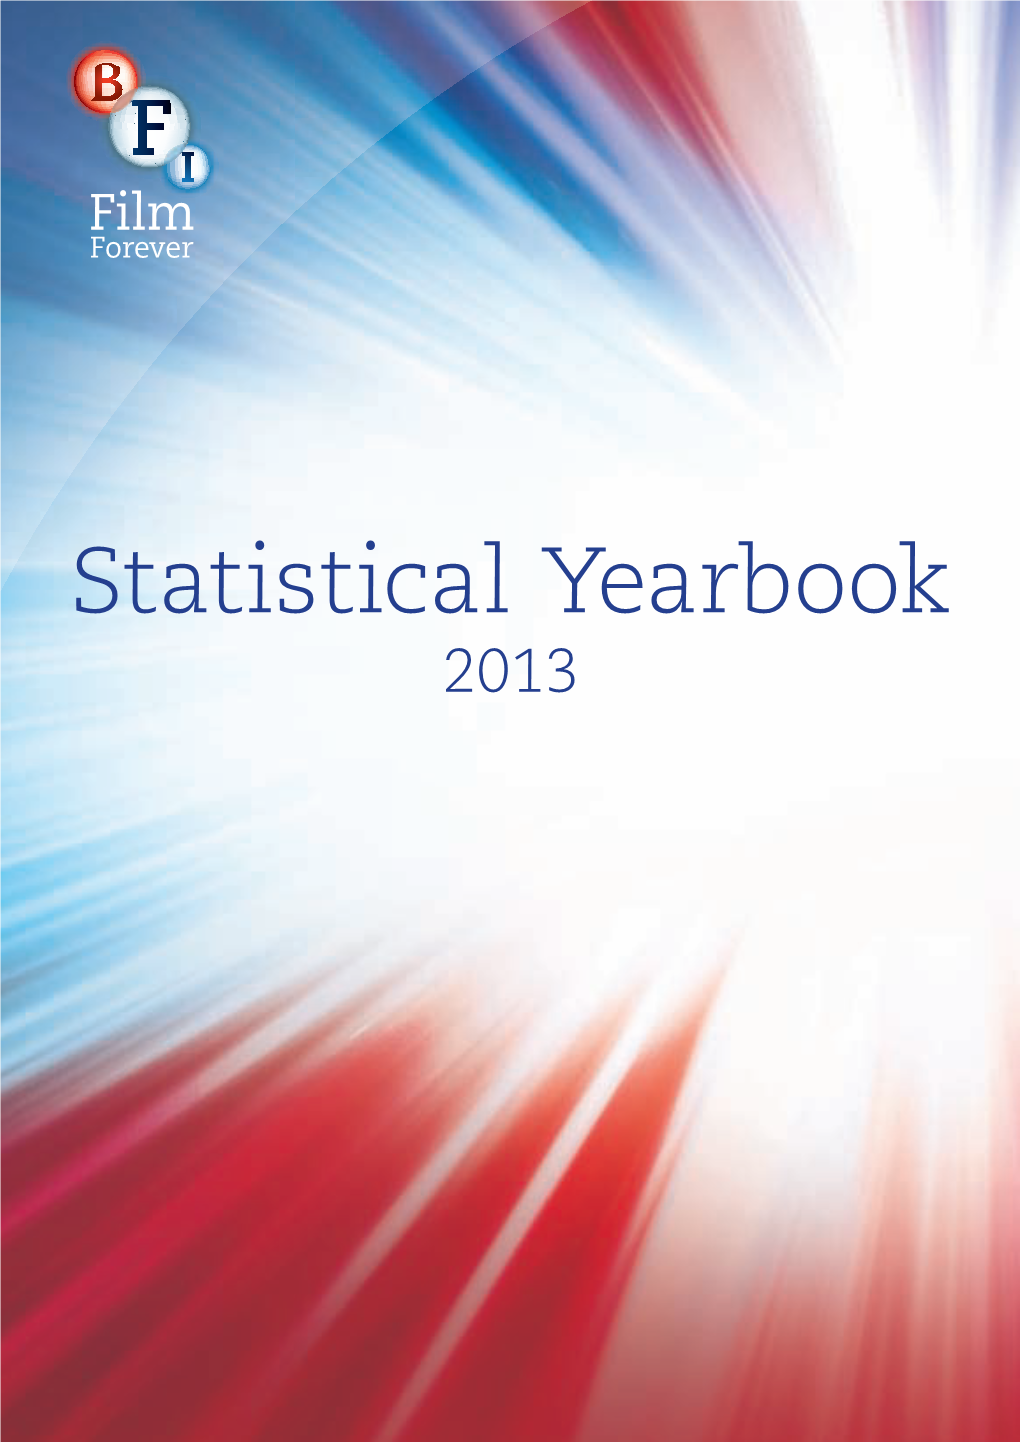 BFI Statistical Yearbook 2013